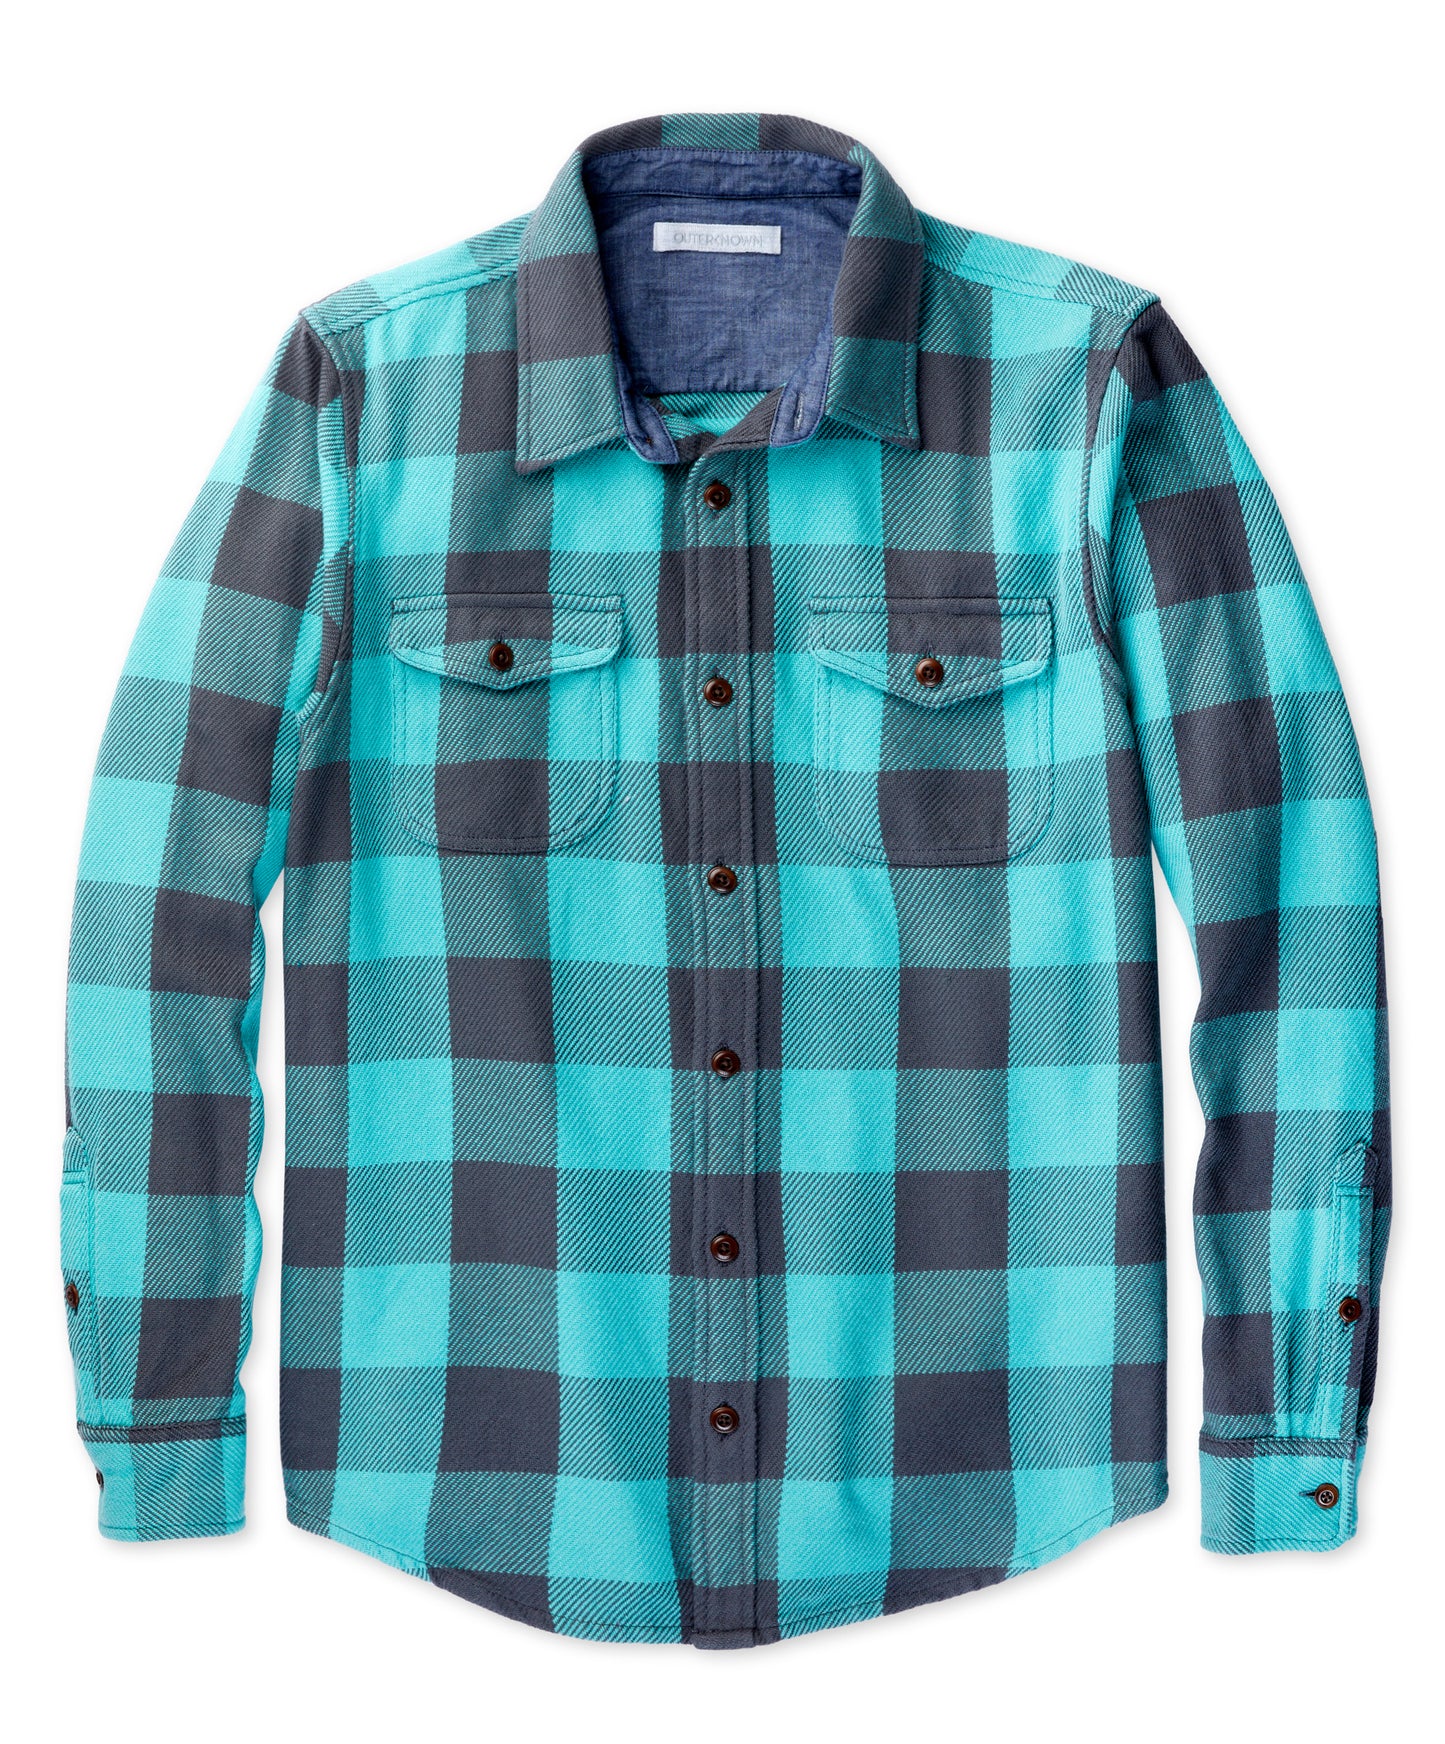 Outerknown - Blanket Shirt - Teal Green Check